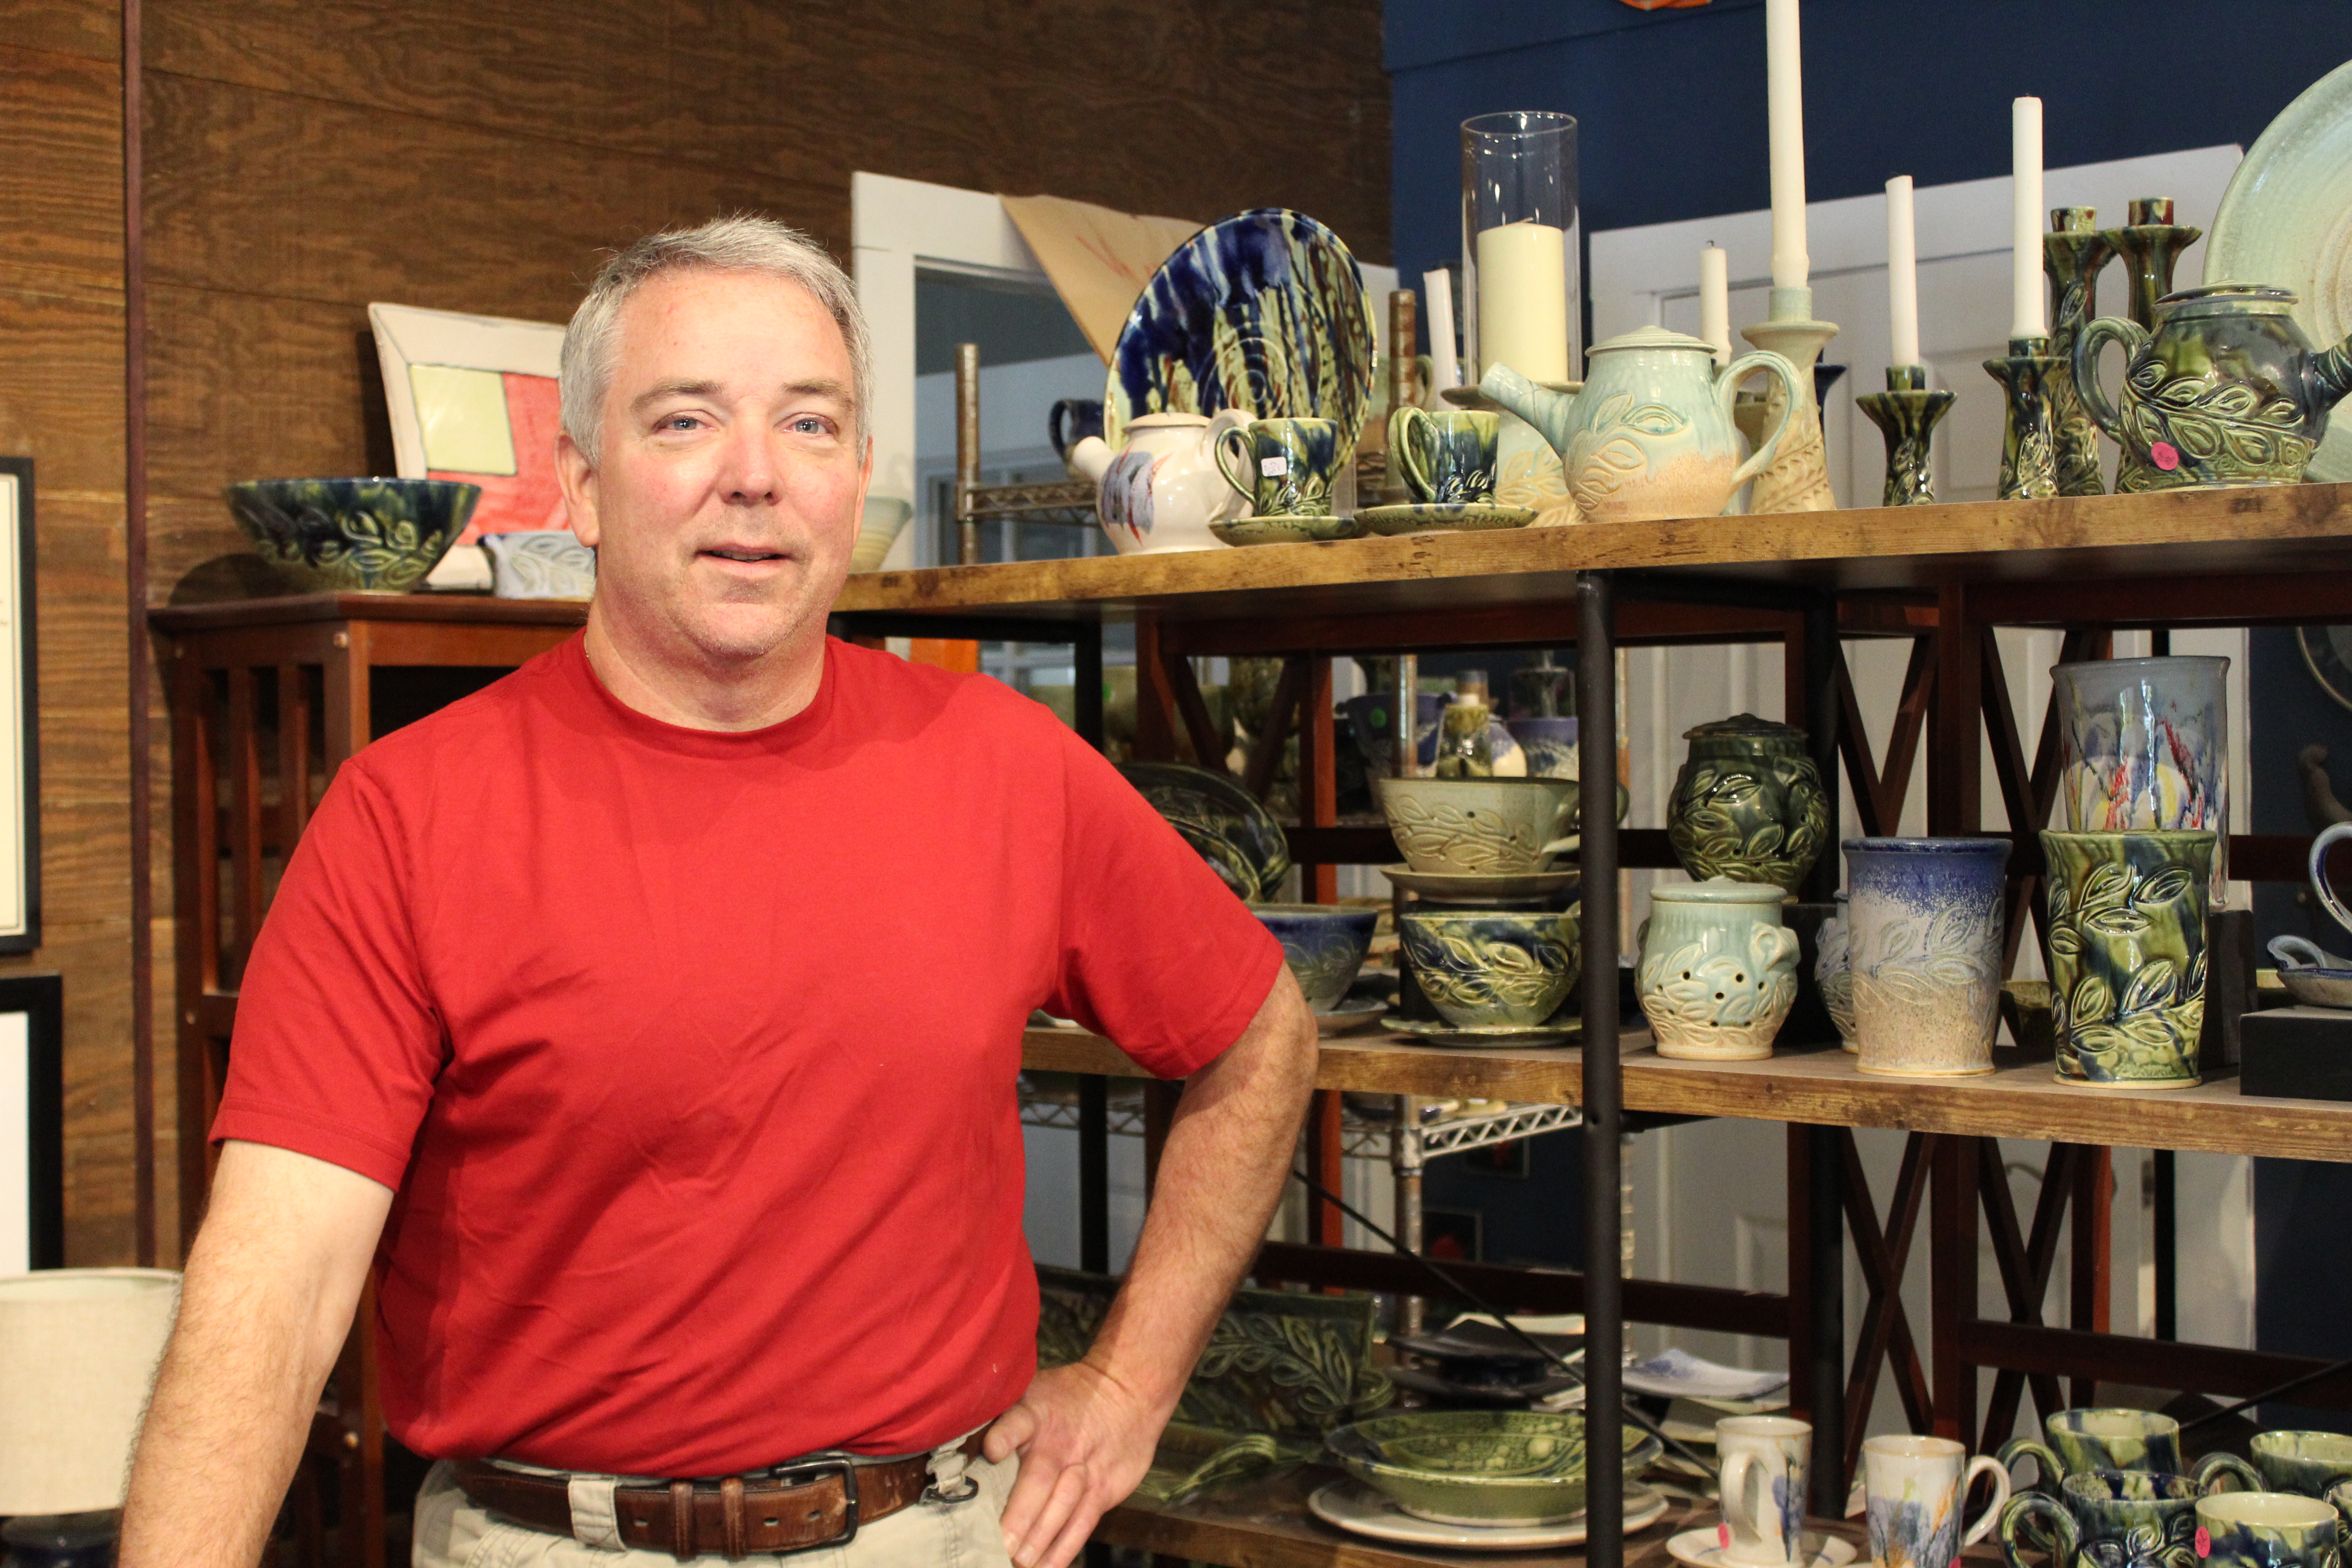 MNJ Photos/ Juliana Walker: Robbie Bell, owner of Speckled Dog Pottery, said he has sold a decent amount of his work online during the past three months.